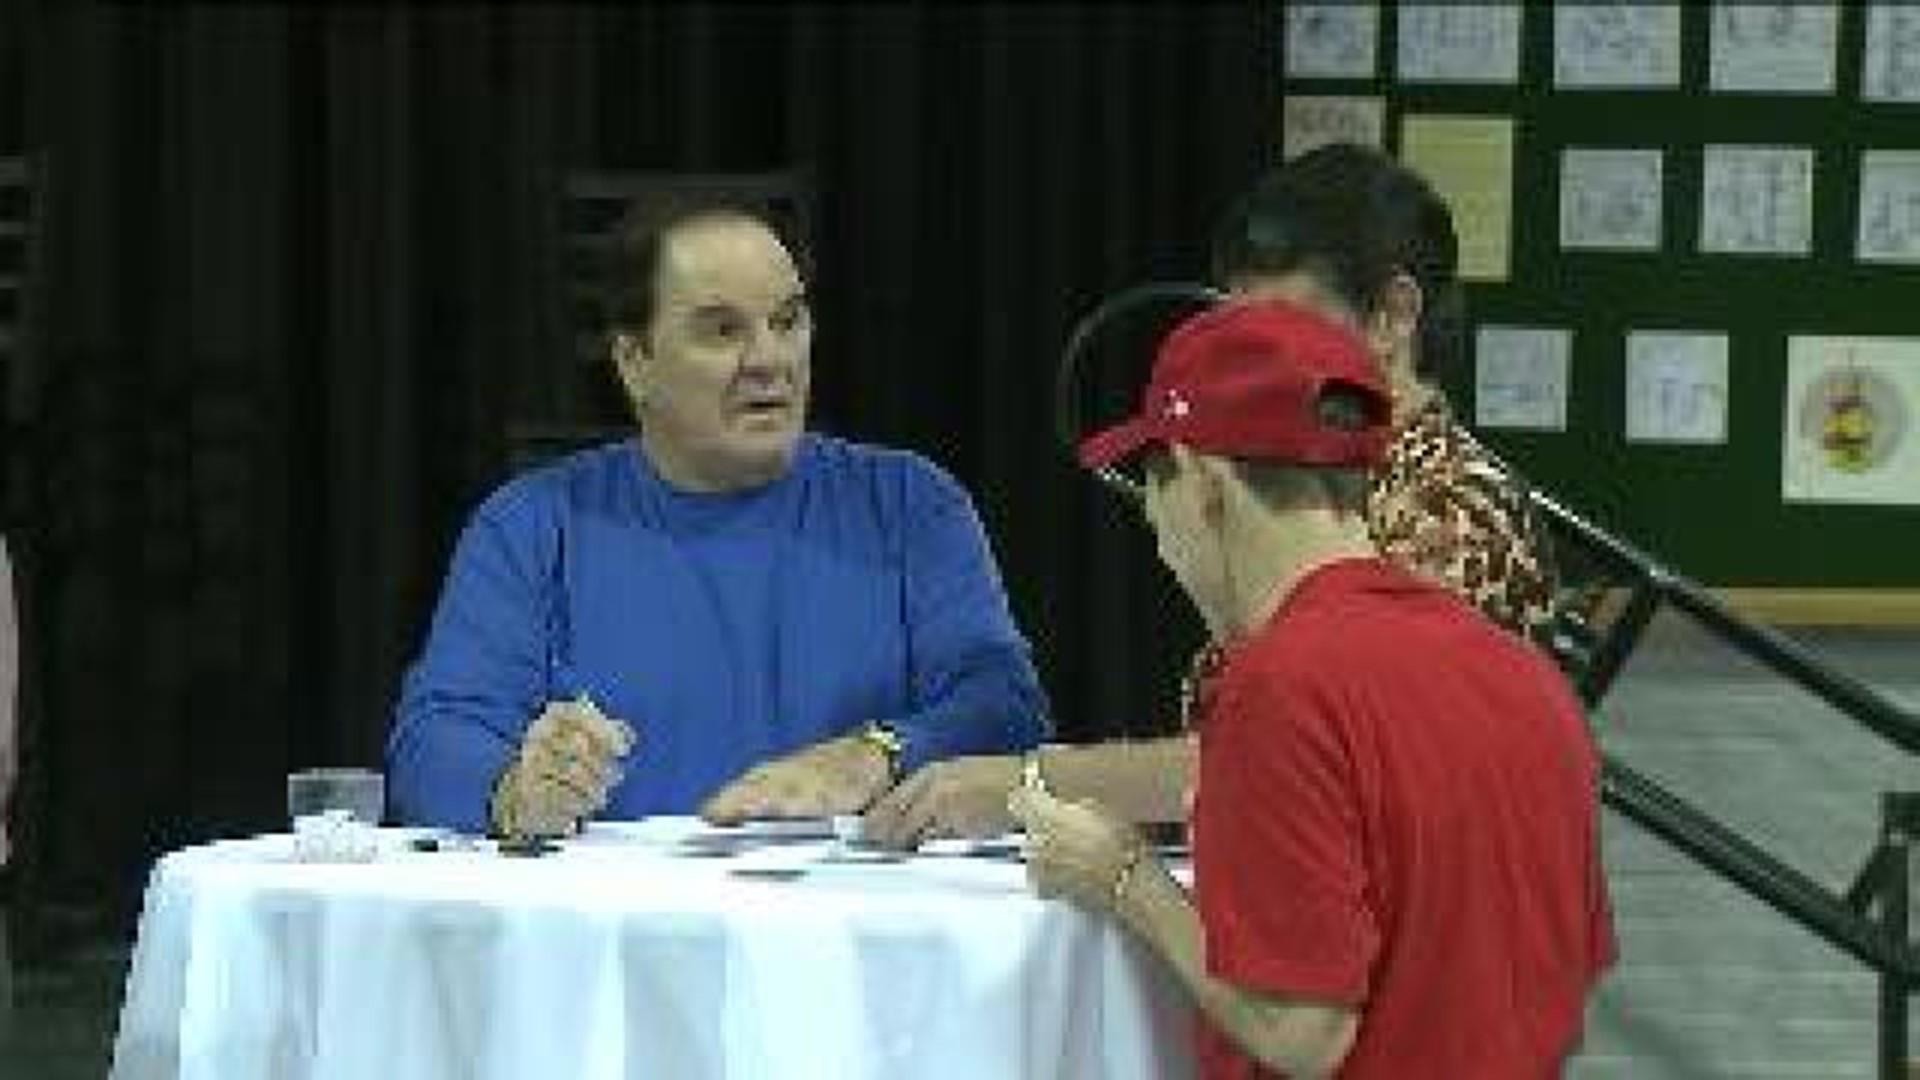 "Party with the Pros" Featured Pete Rose